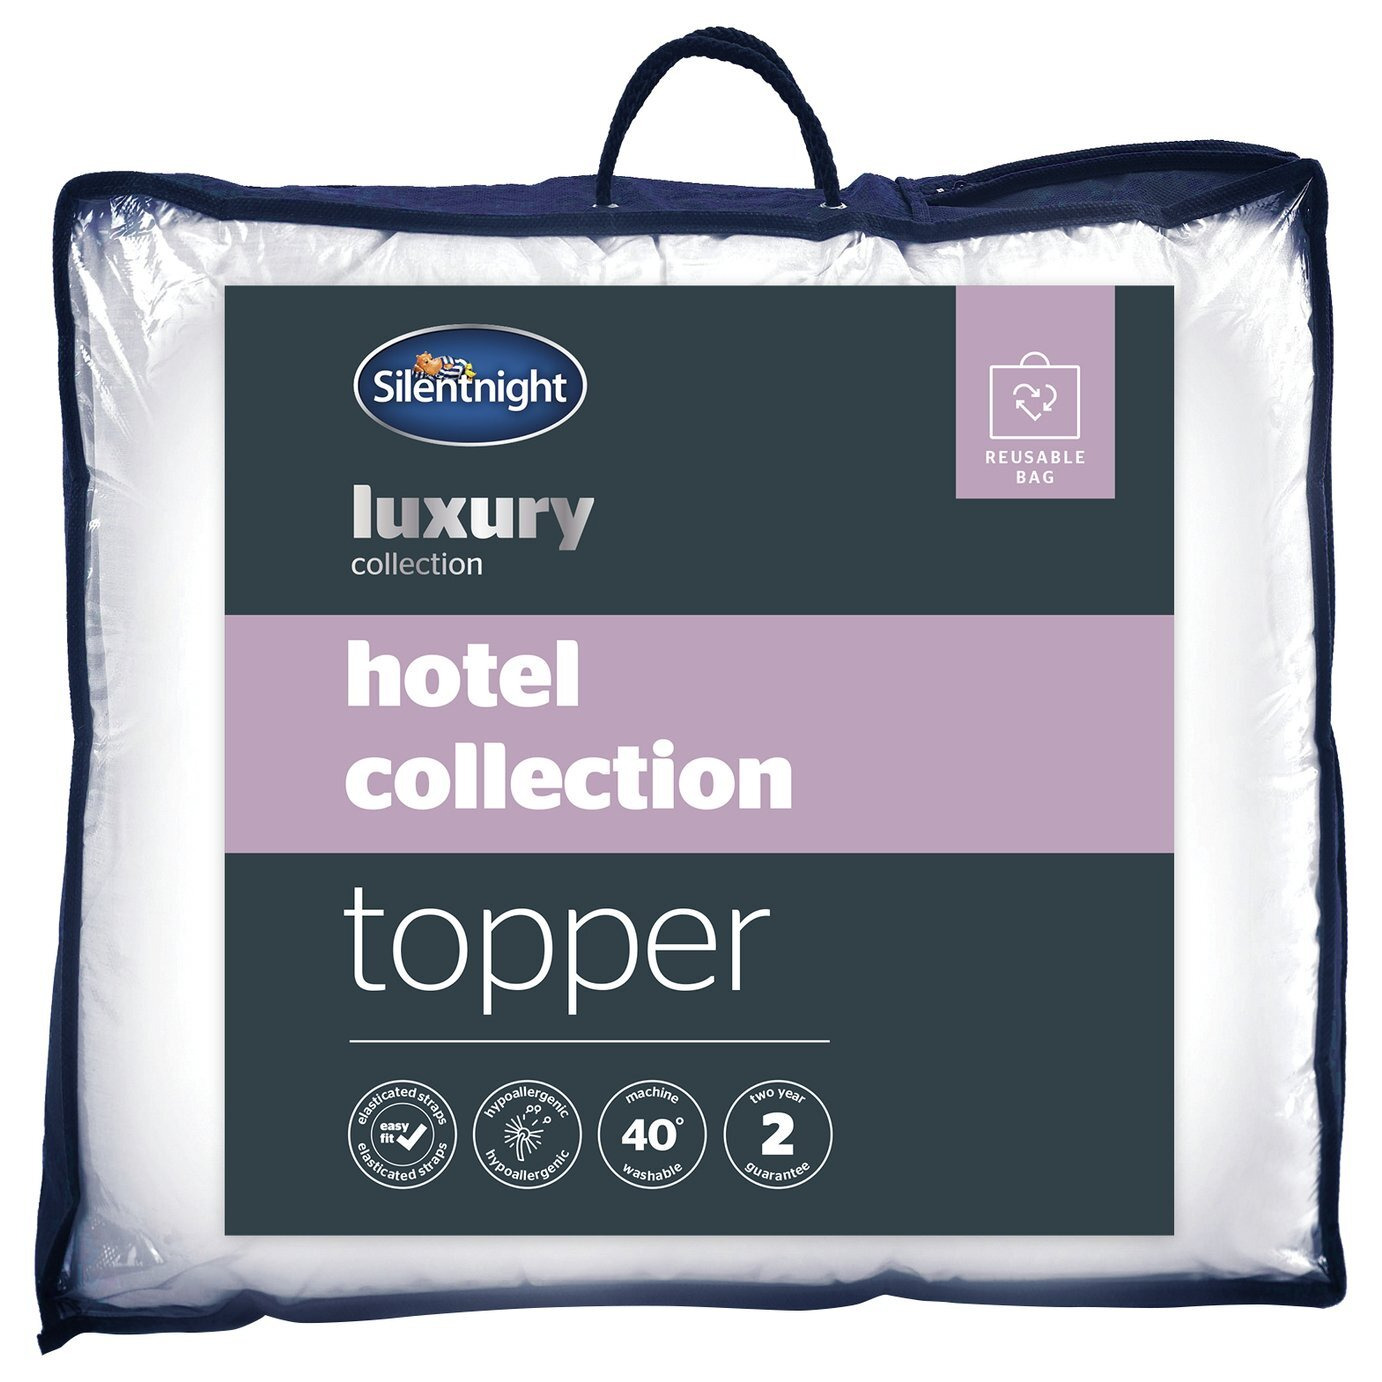 Silentnight Luxury Hotel Collection Mattress Topper - Double - image 1